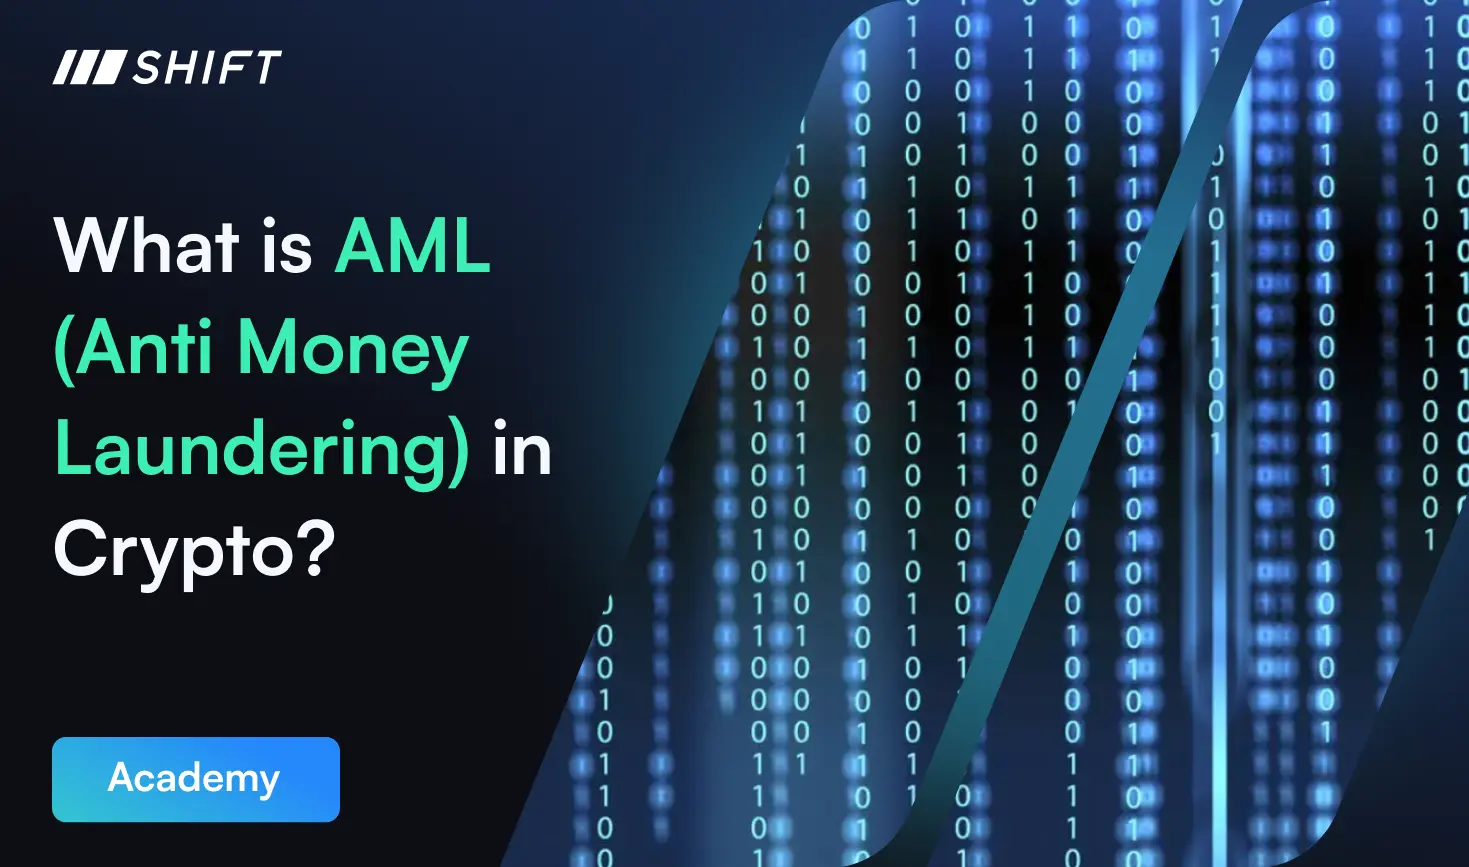 AML (Anti Money Laundering) is a fundamental piece to institutional crypto adoption. Learn more with Shift Markets.